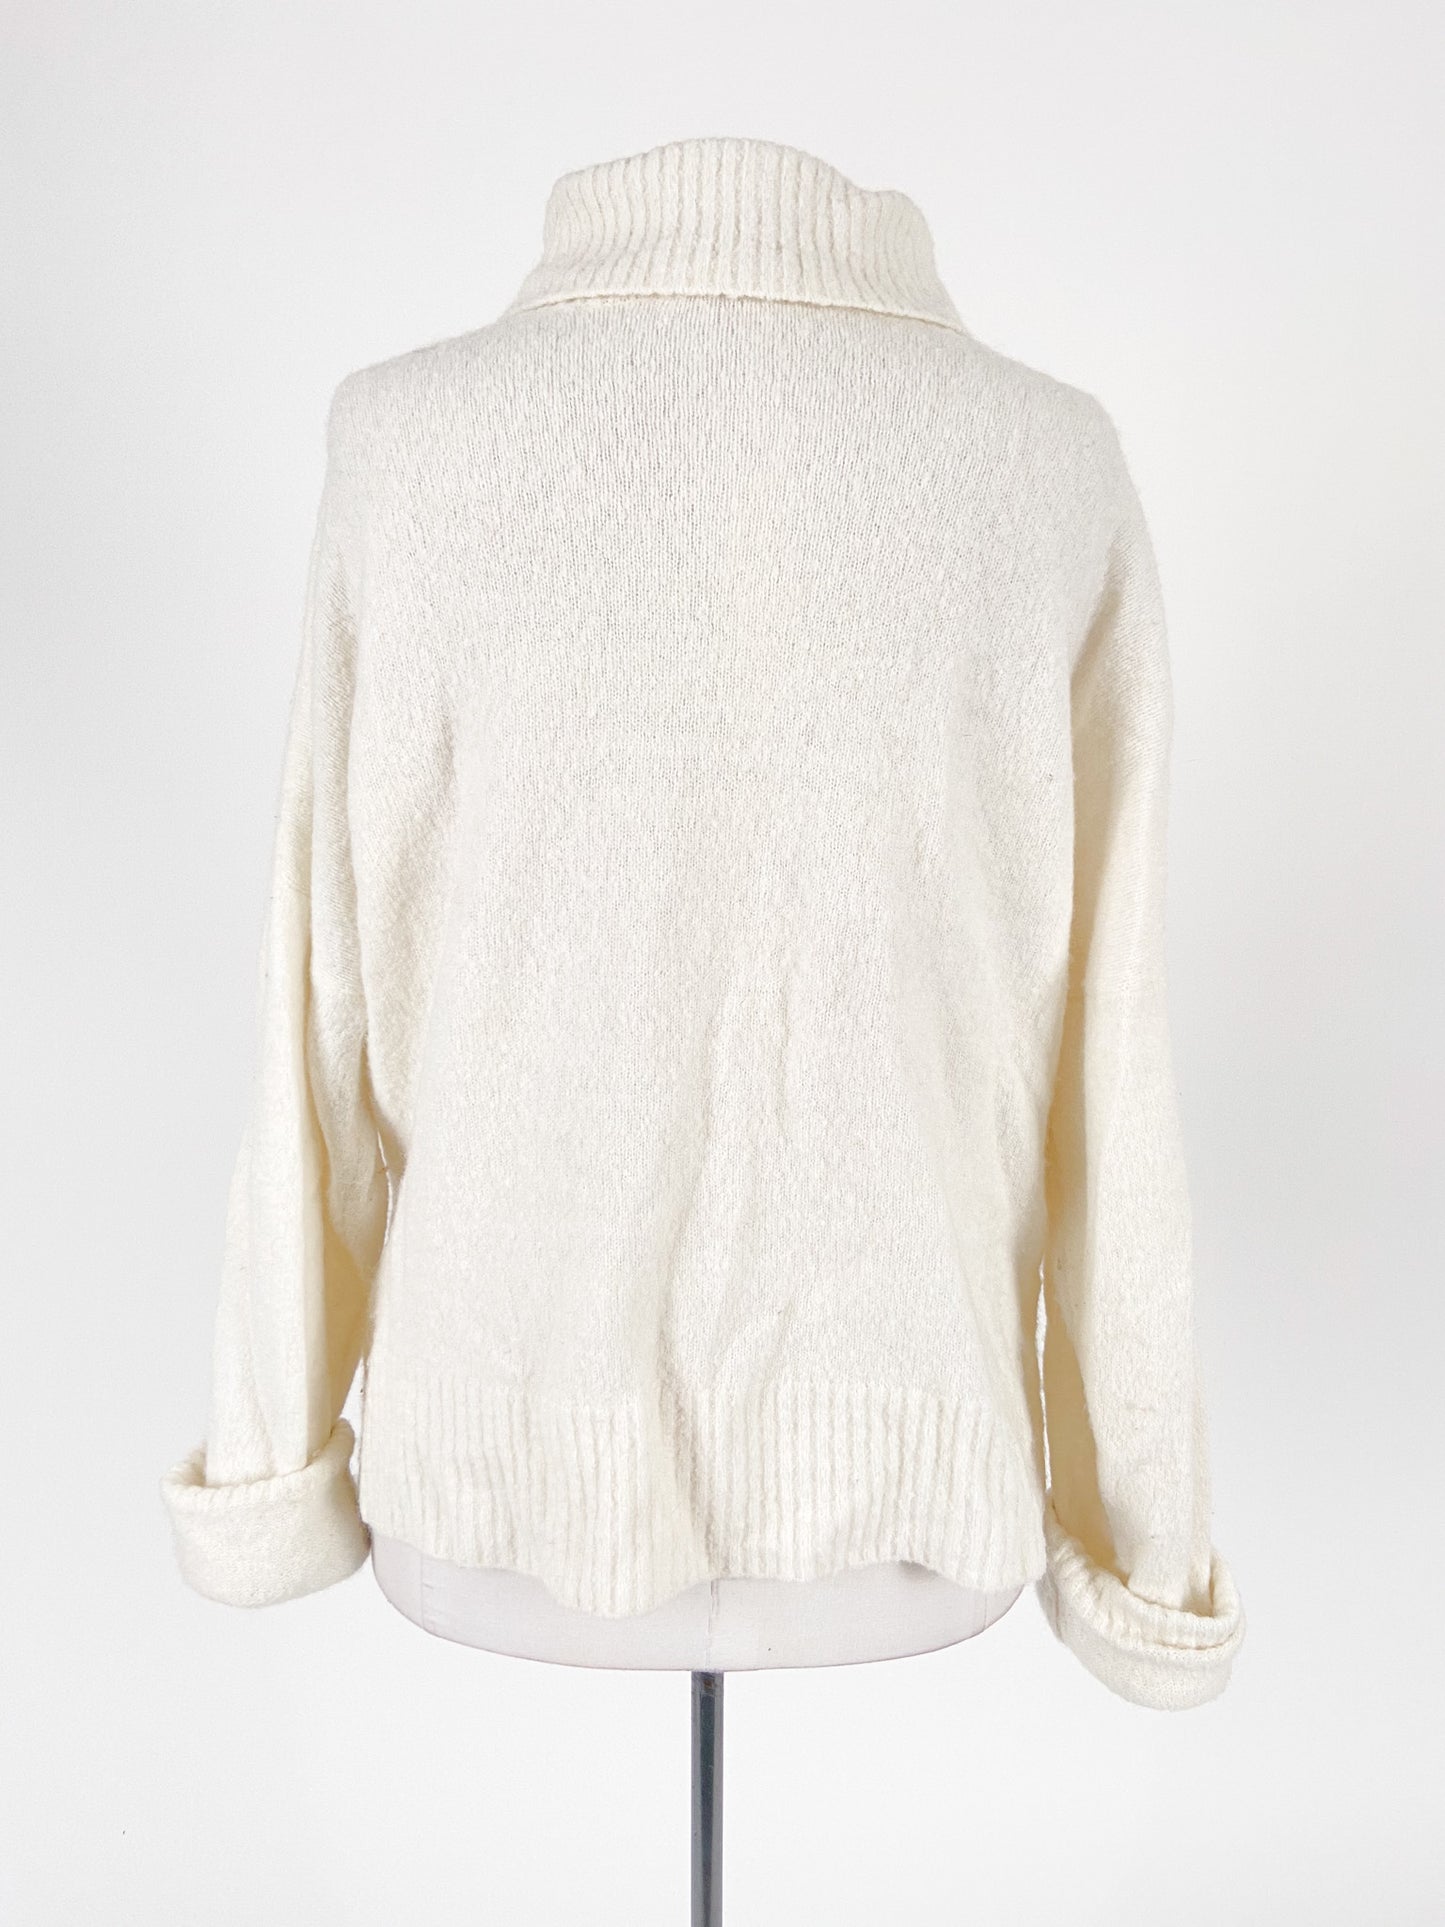 A&C | White Casual/Workwear Jumper | Size XS